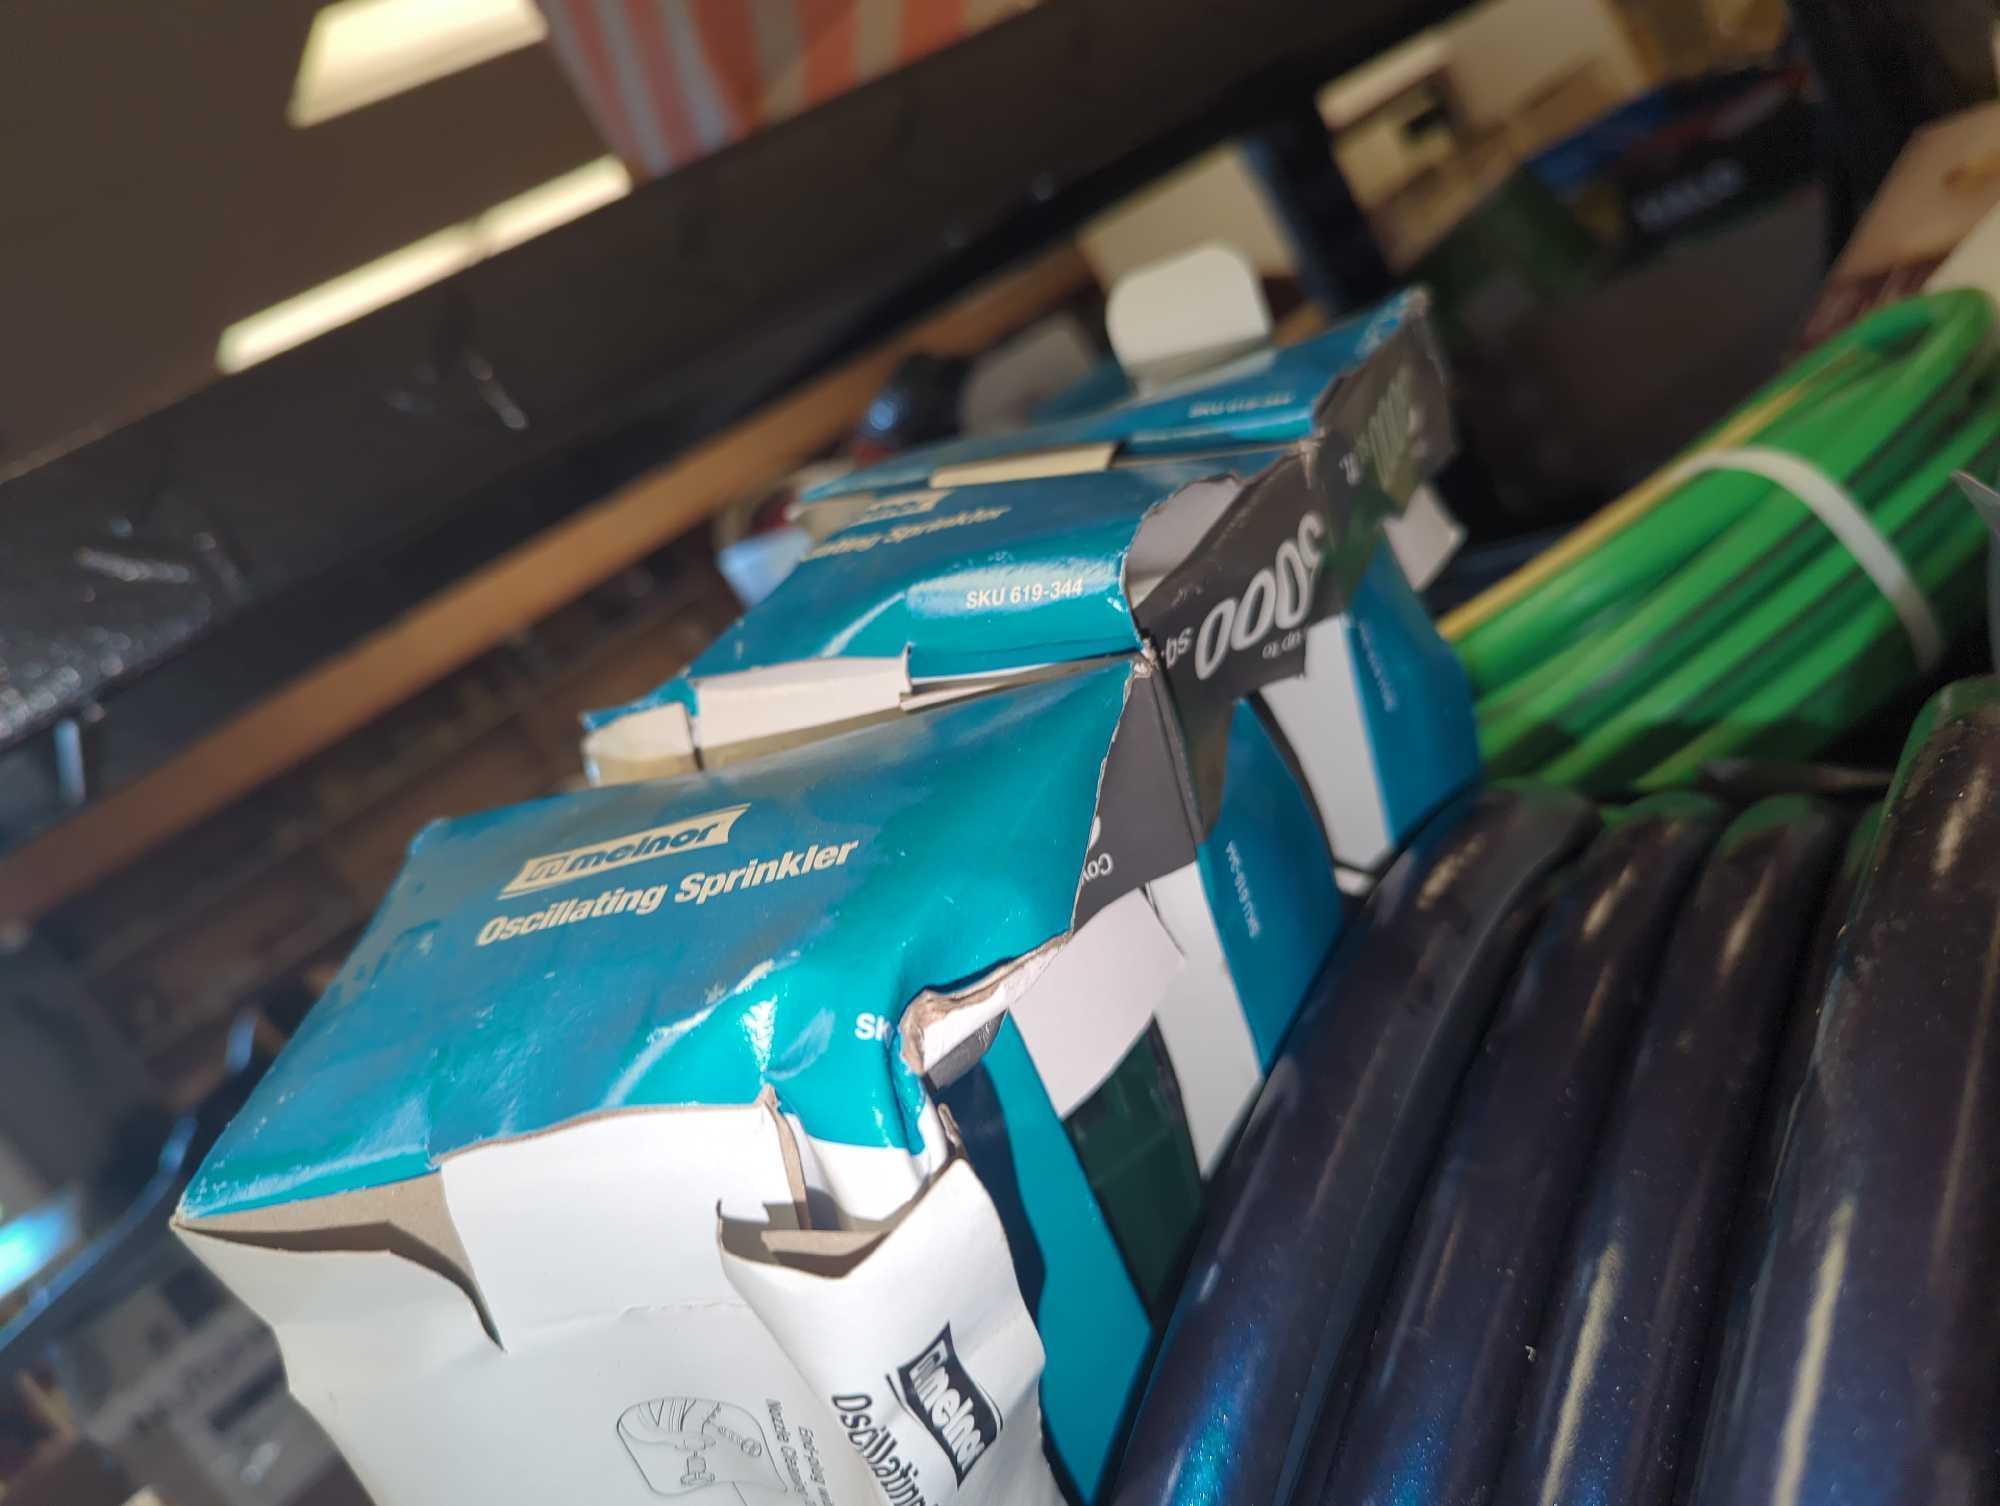 Partial Shelf Lot of Assorted Items Including Swan 100 Foot Professional Duty Hose, Glacier Bay